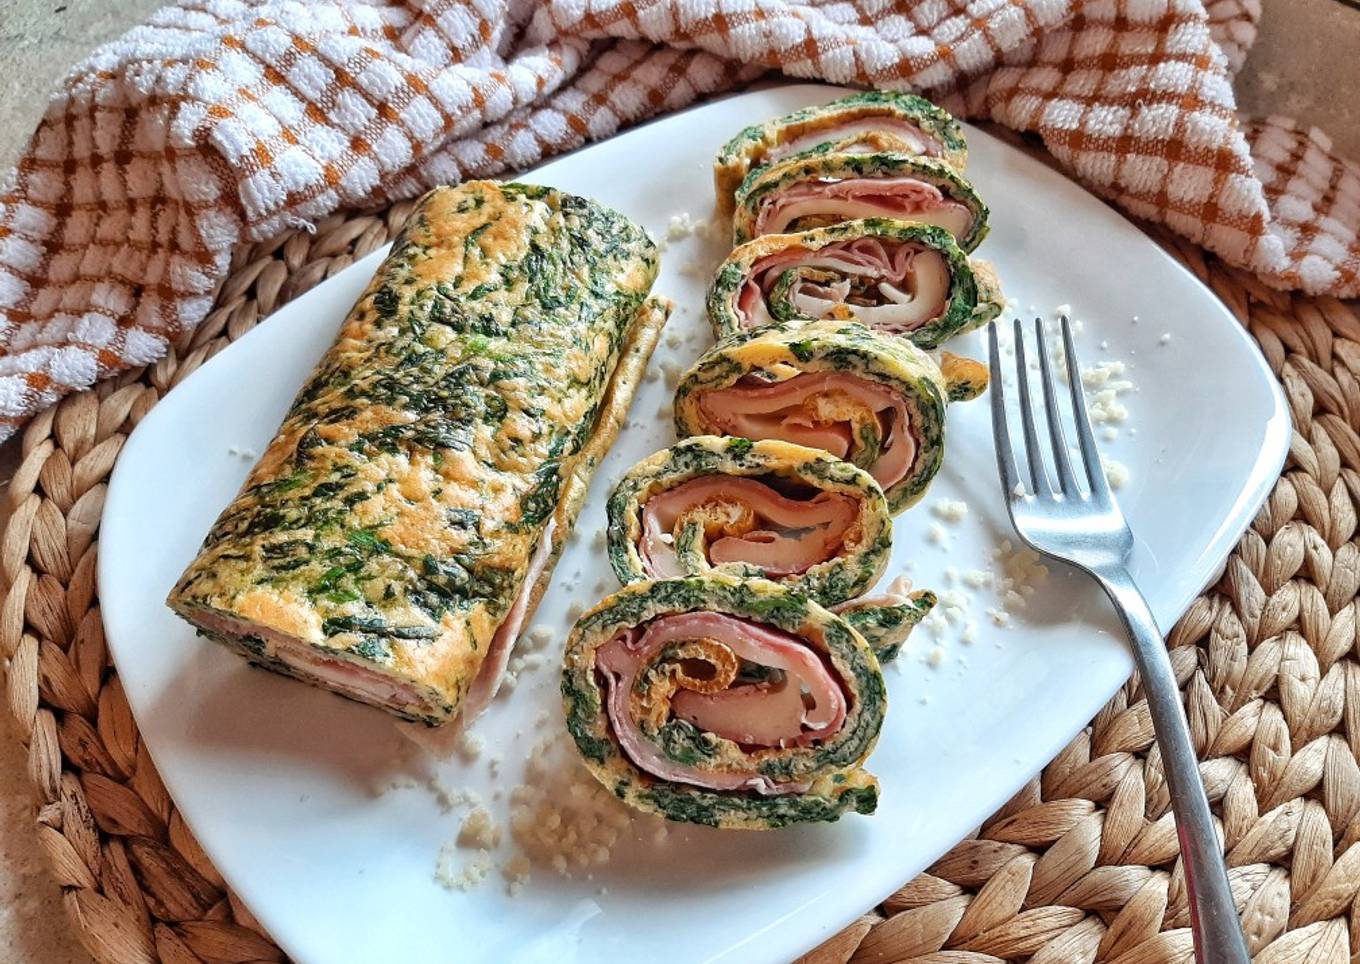 Roll with spinach